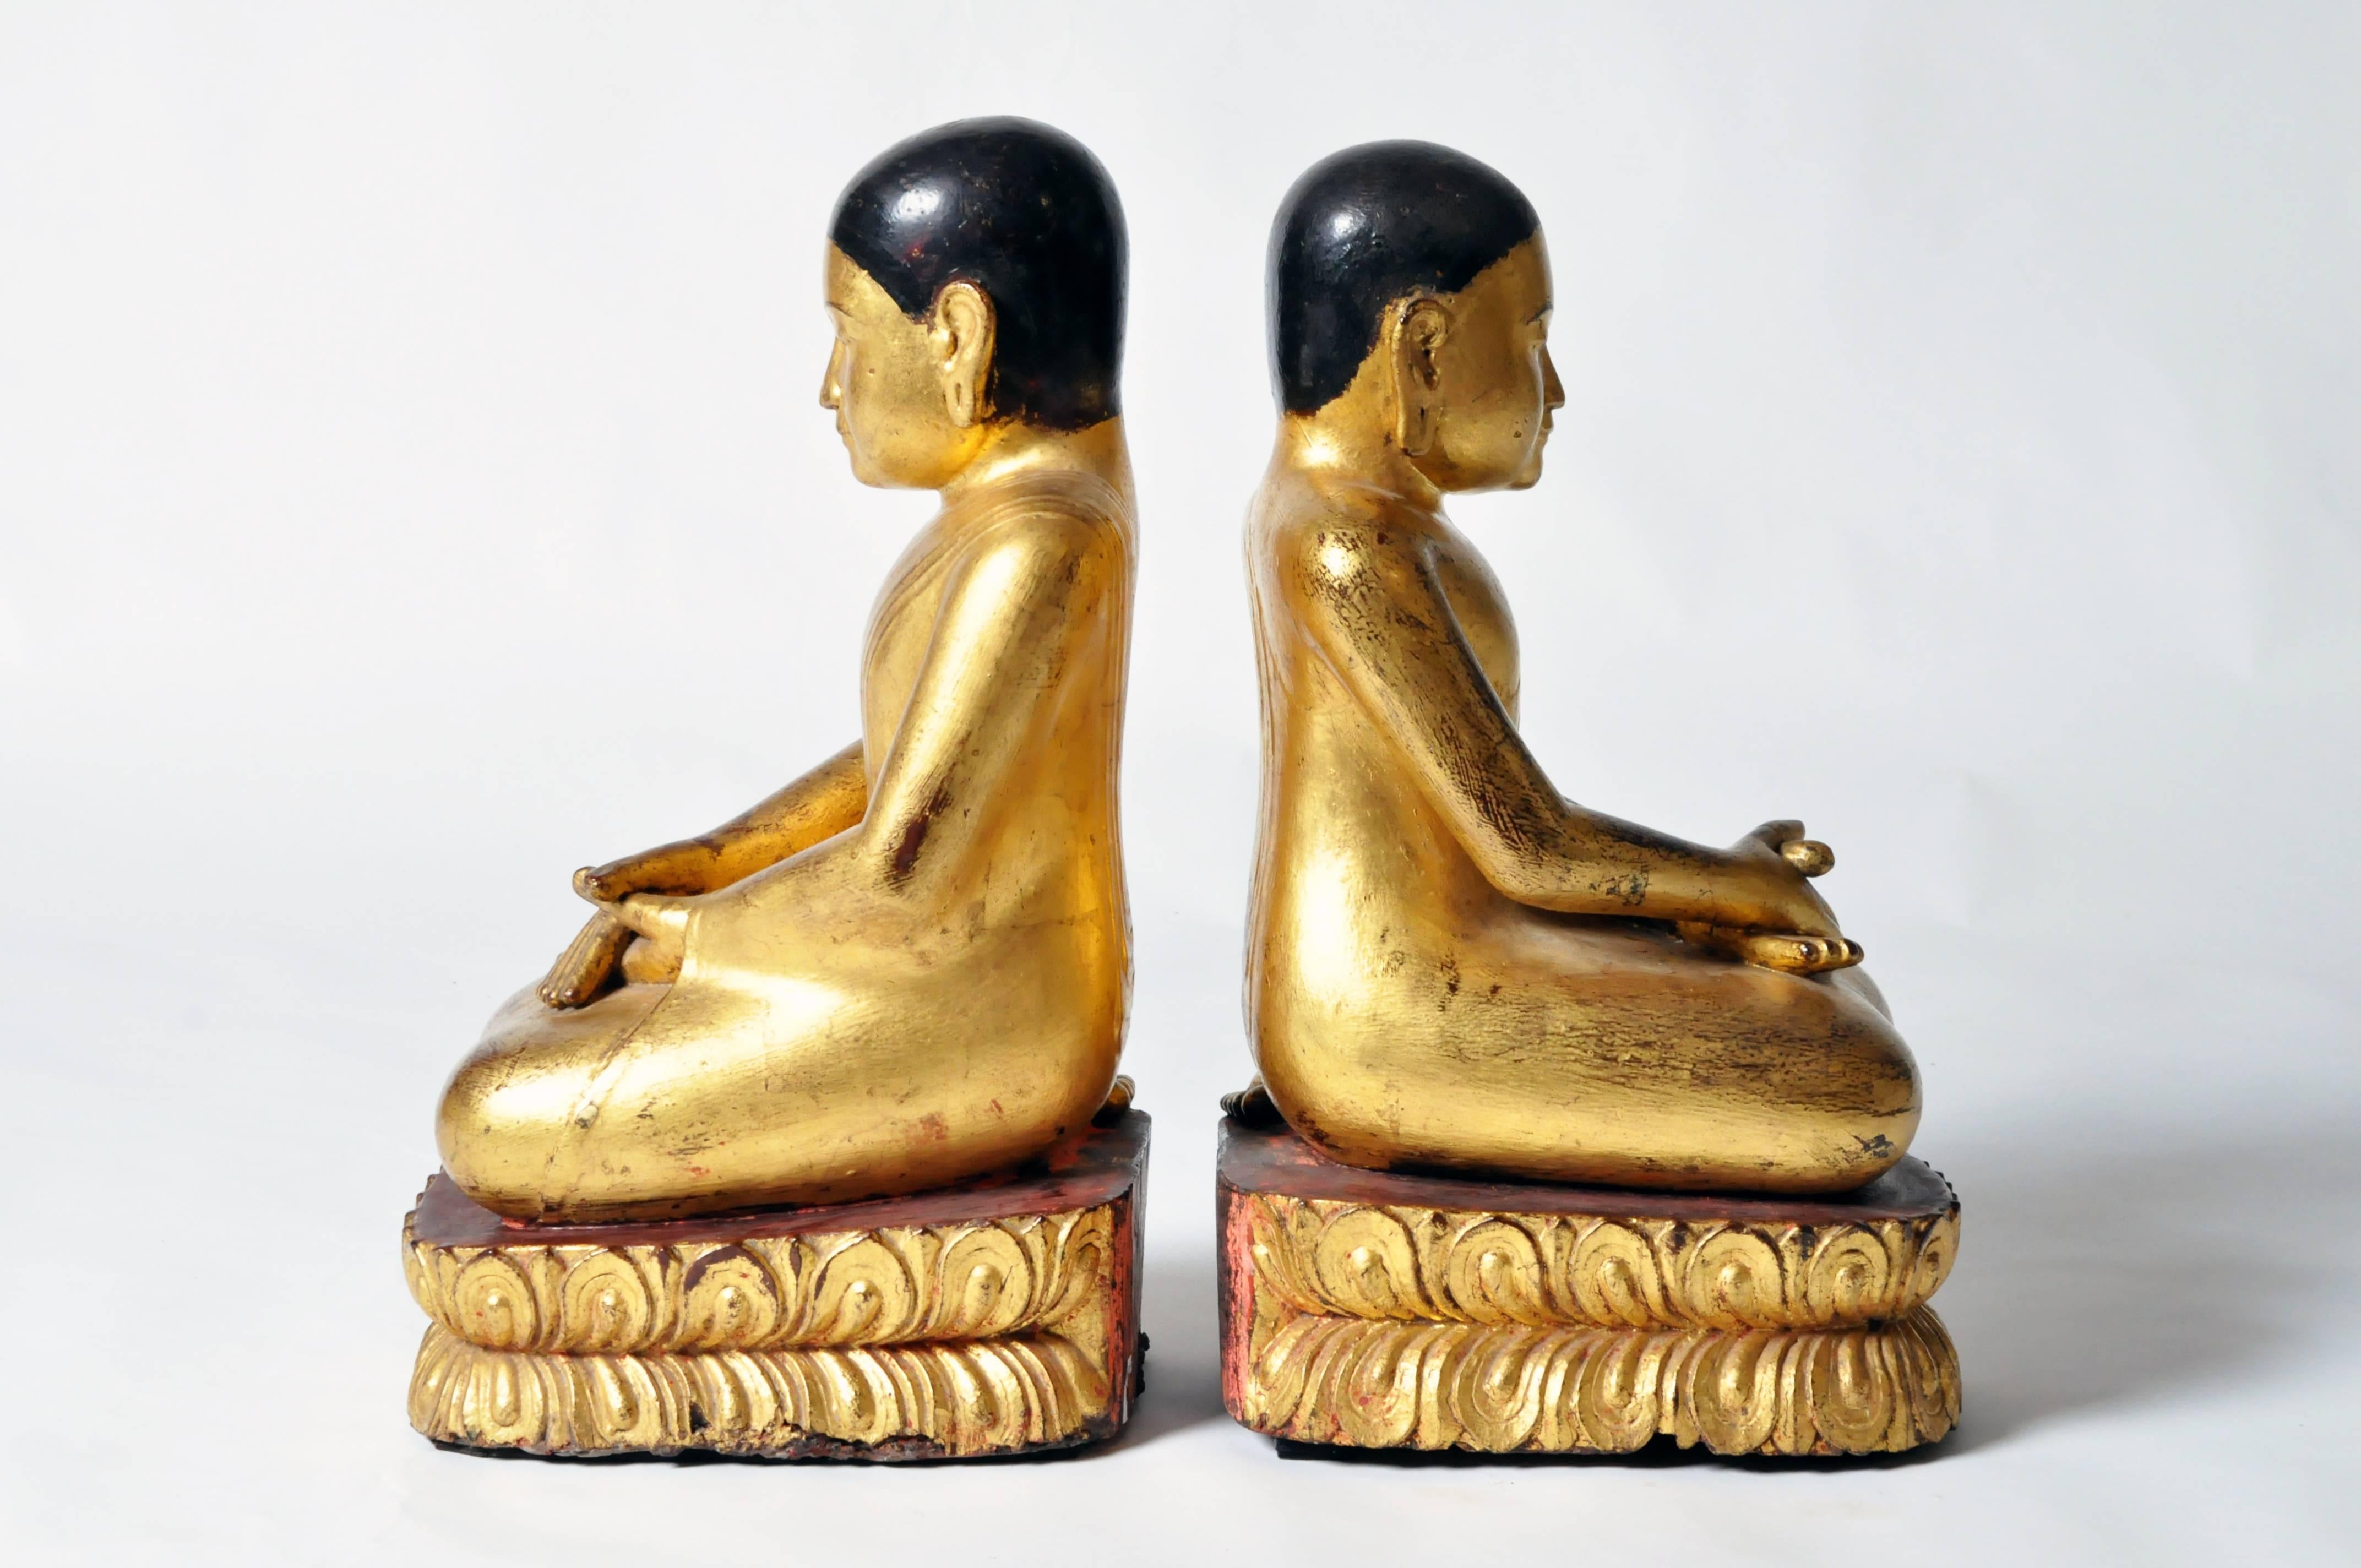 According to Buddhist tradition, the Buddha had two first Chief Disciples, Sāriputta and Moggallāna. Depictions of these apostles are often found along side Buddha statues on temple altars.

Both apostles are depicted in a worshipful pose, their